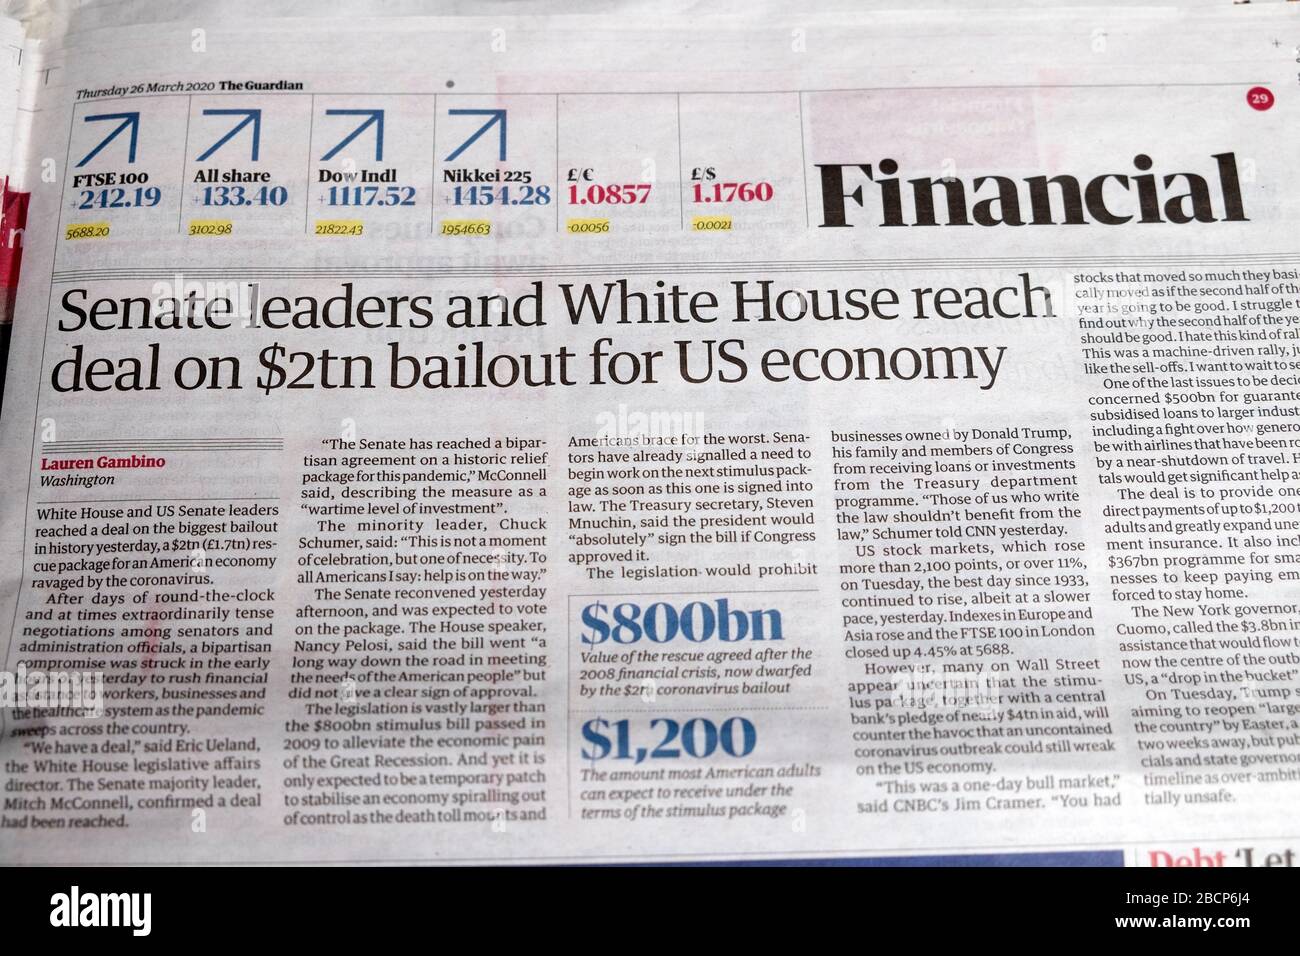 'Senate leaders and White House reach deal on $2tn bailout for US economy' financial headline article in Guardian newspaper 26 March 2020 London UK Stock Photo